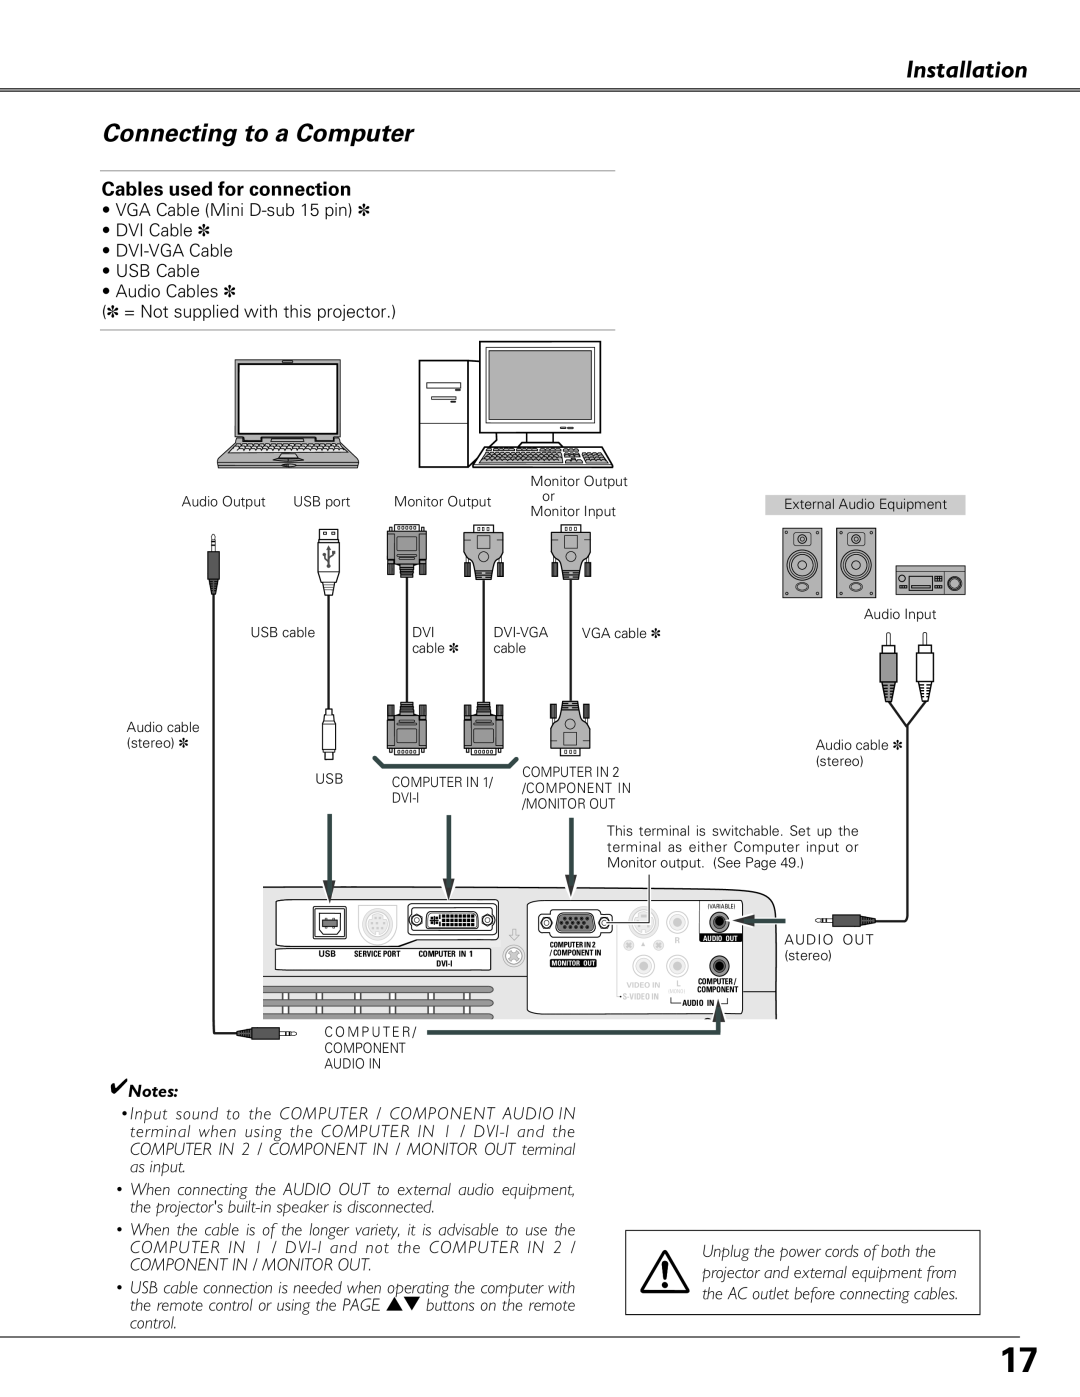 Sanyo PLC-XU84, PLC-XU87 owner manual Installation Connecting to a Computer, Cables used for connection 